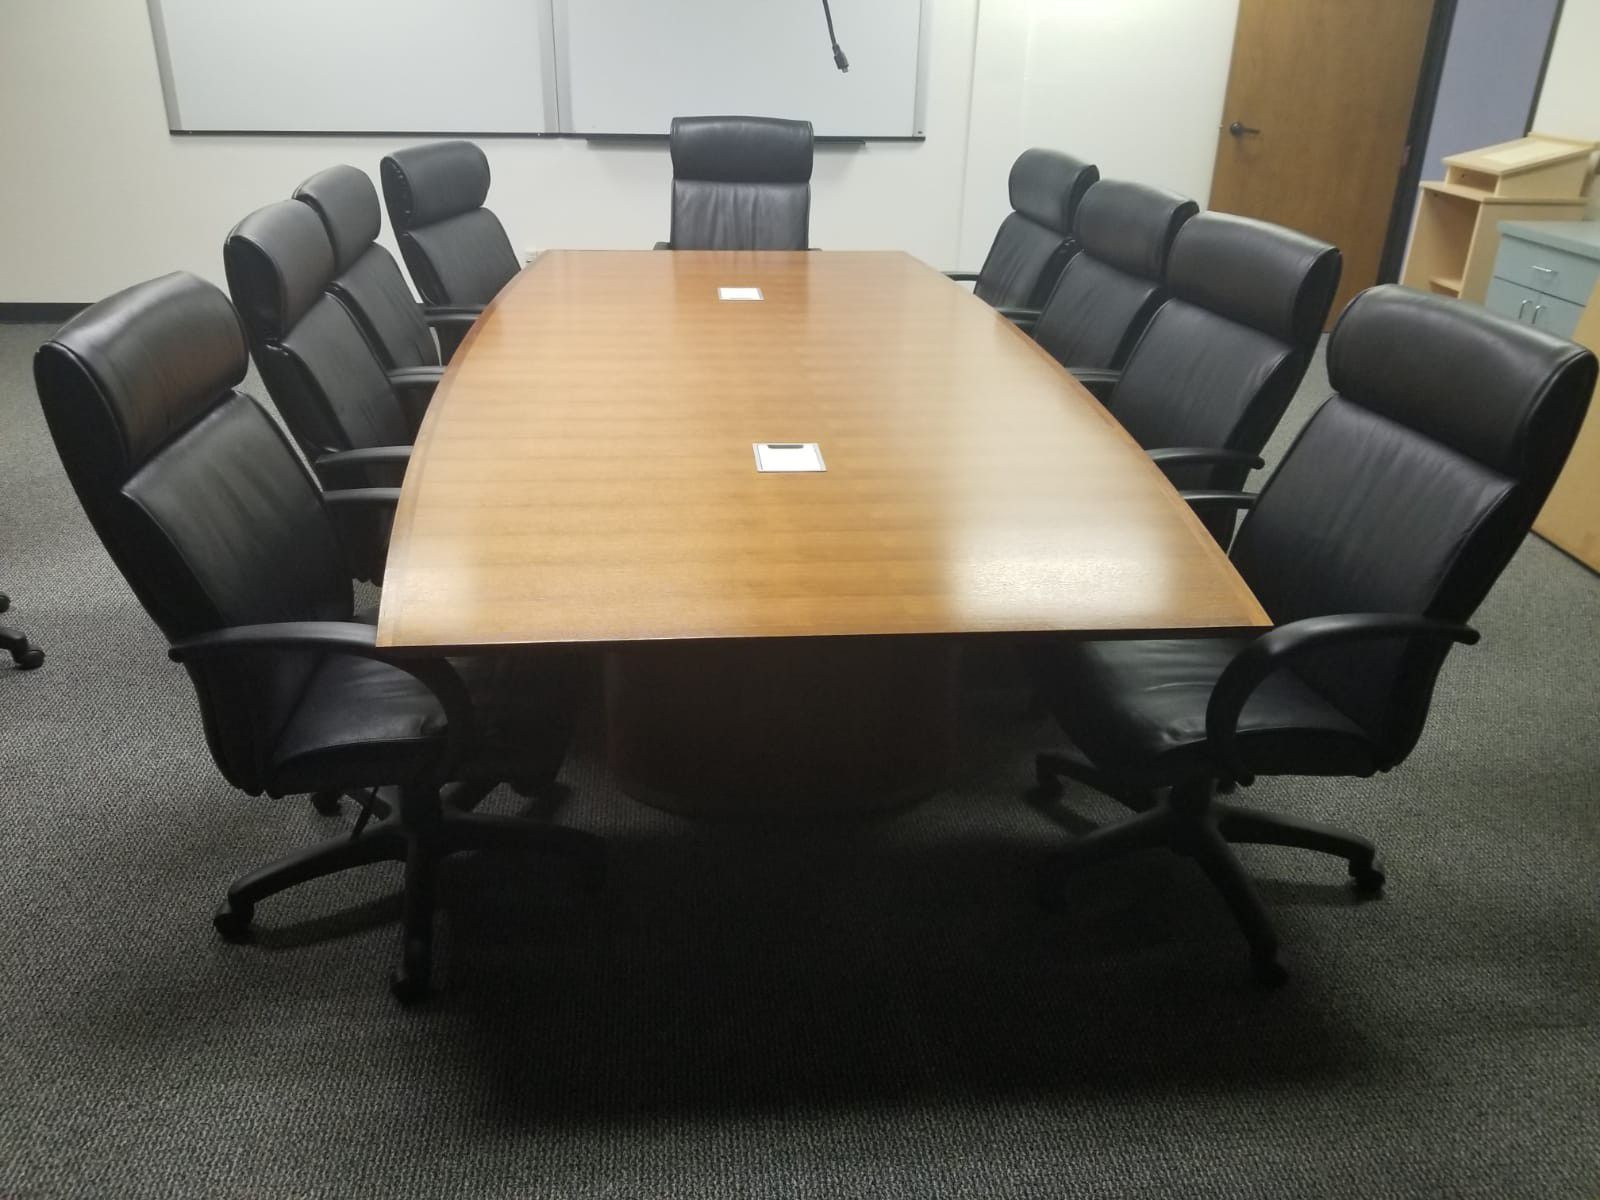 10' x 4' Conference Table, Steelcase, Real Wood, Office furniture